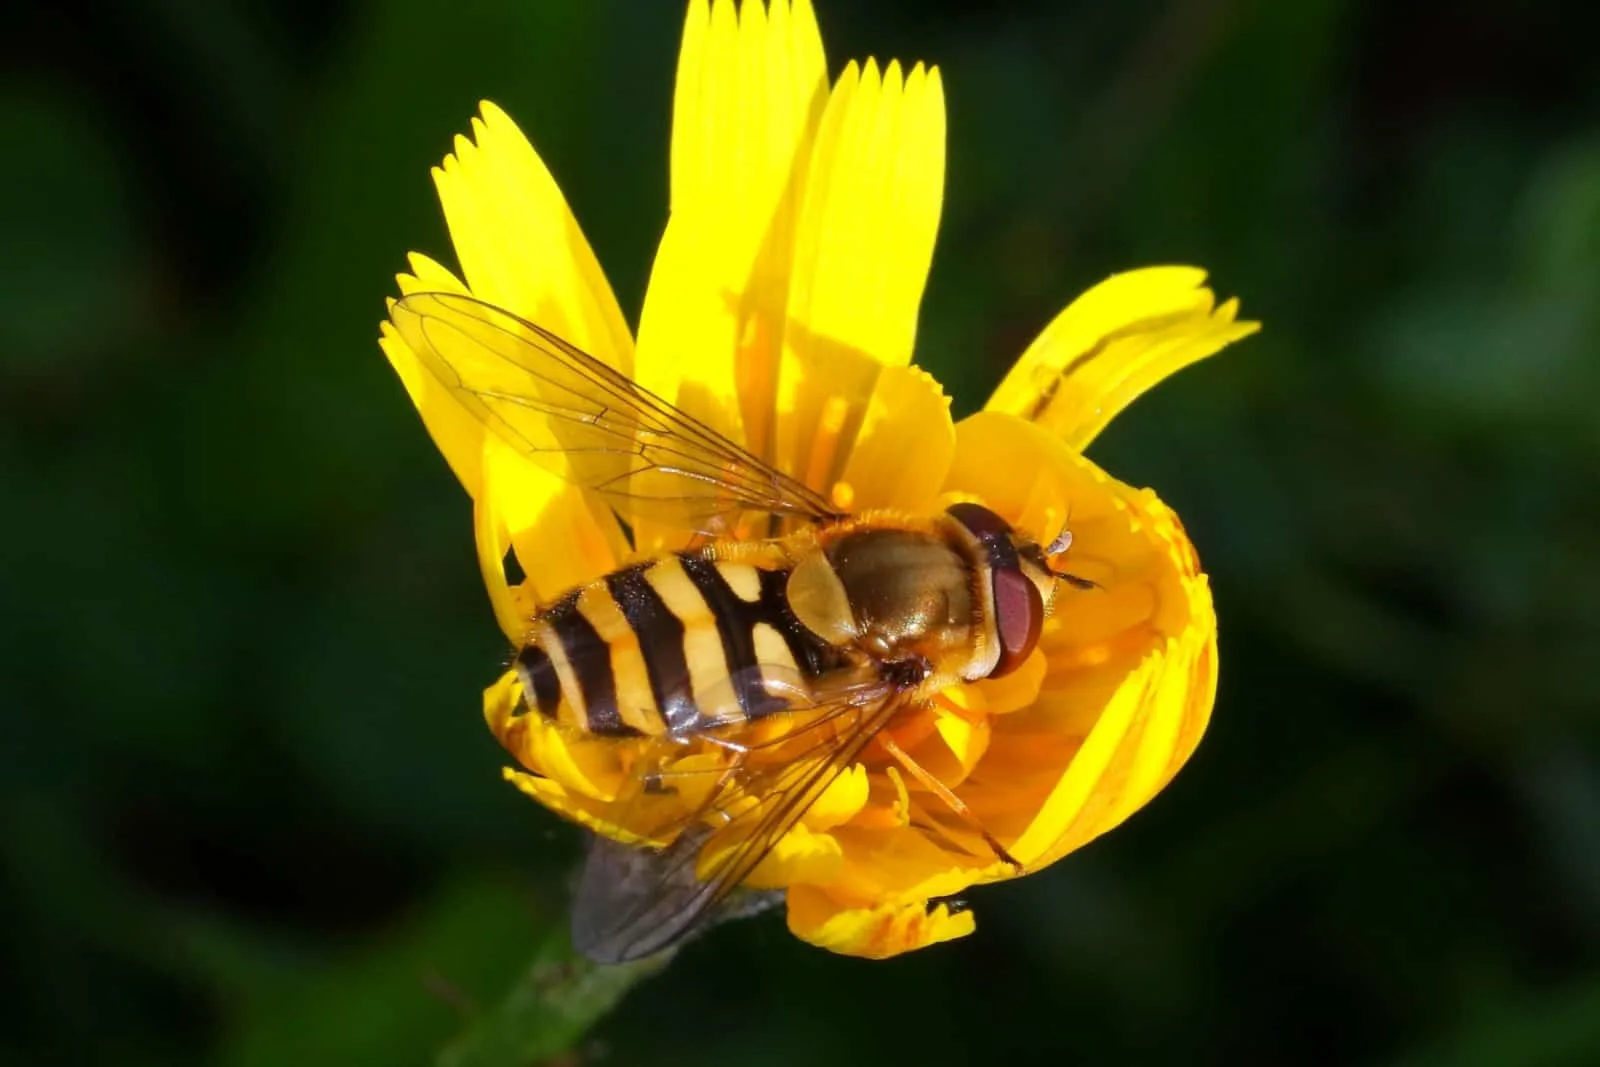 Hoverfly on a yellow hawkweed